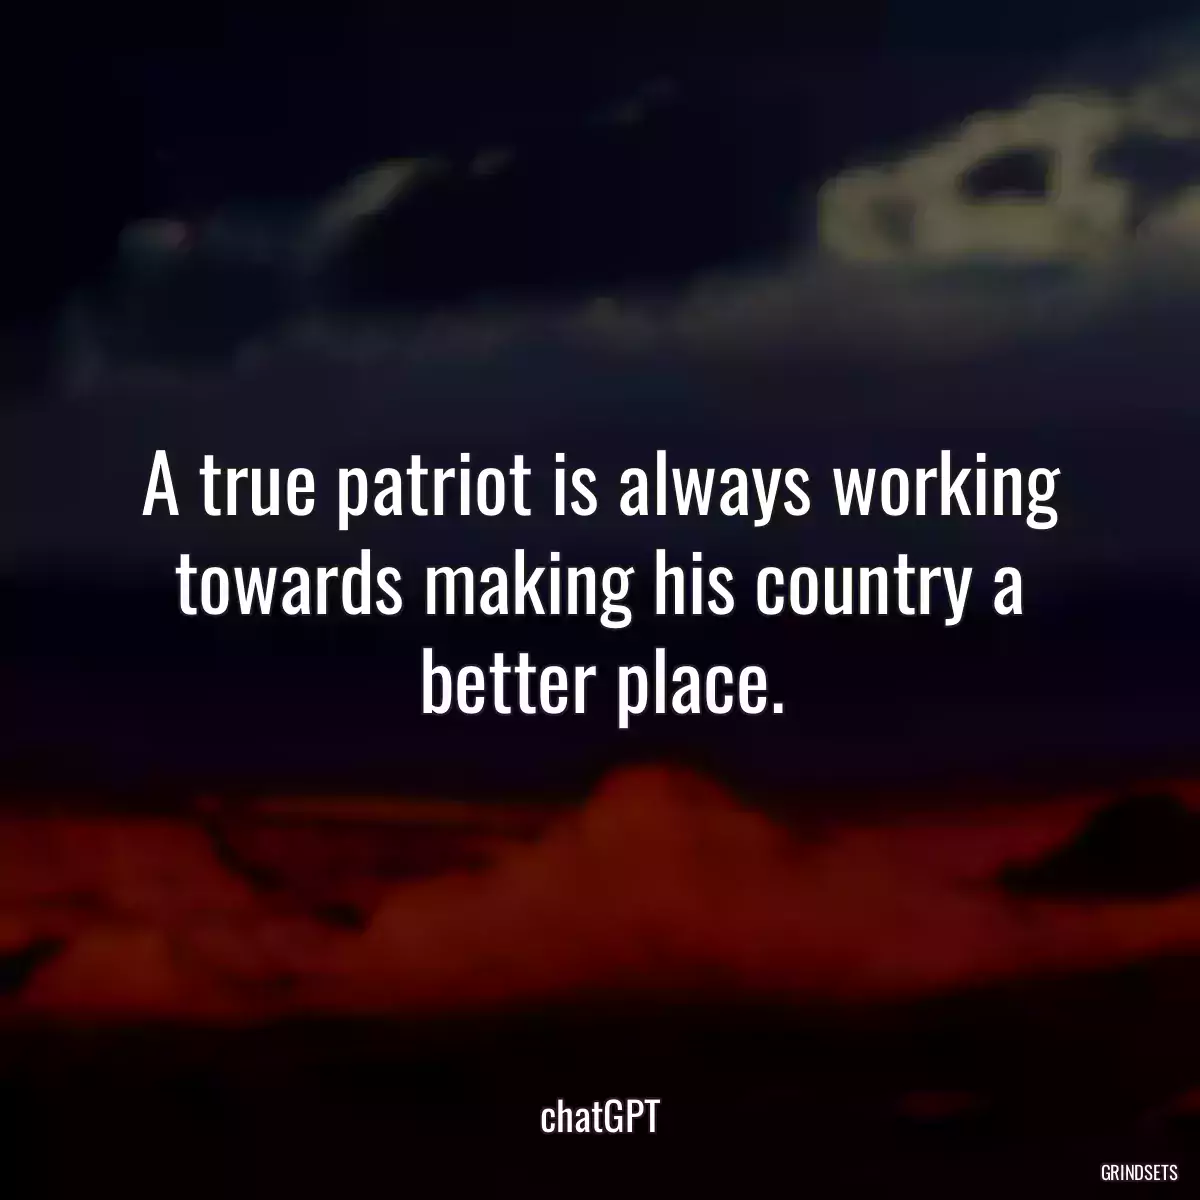 A true patriot is always working towards making his country a better place.